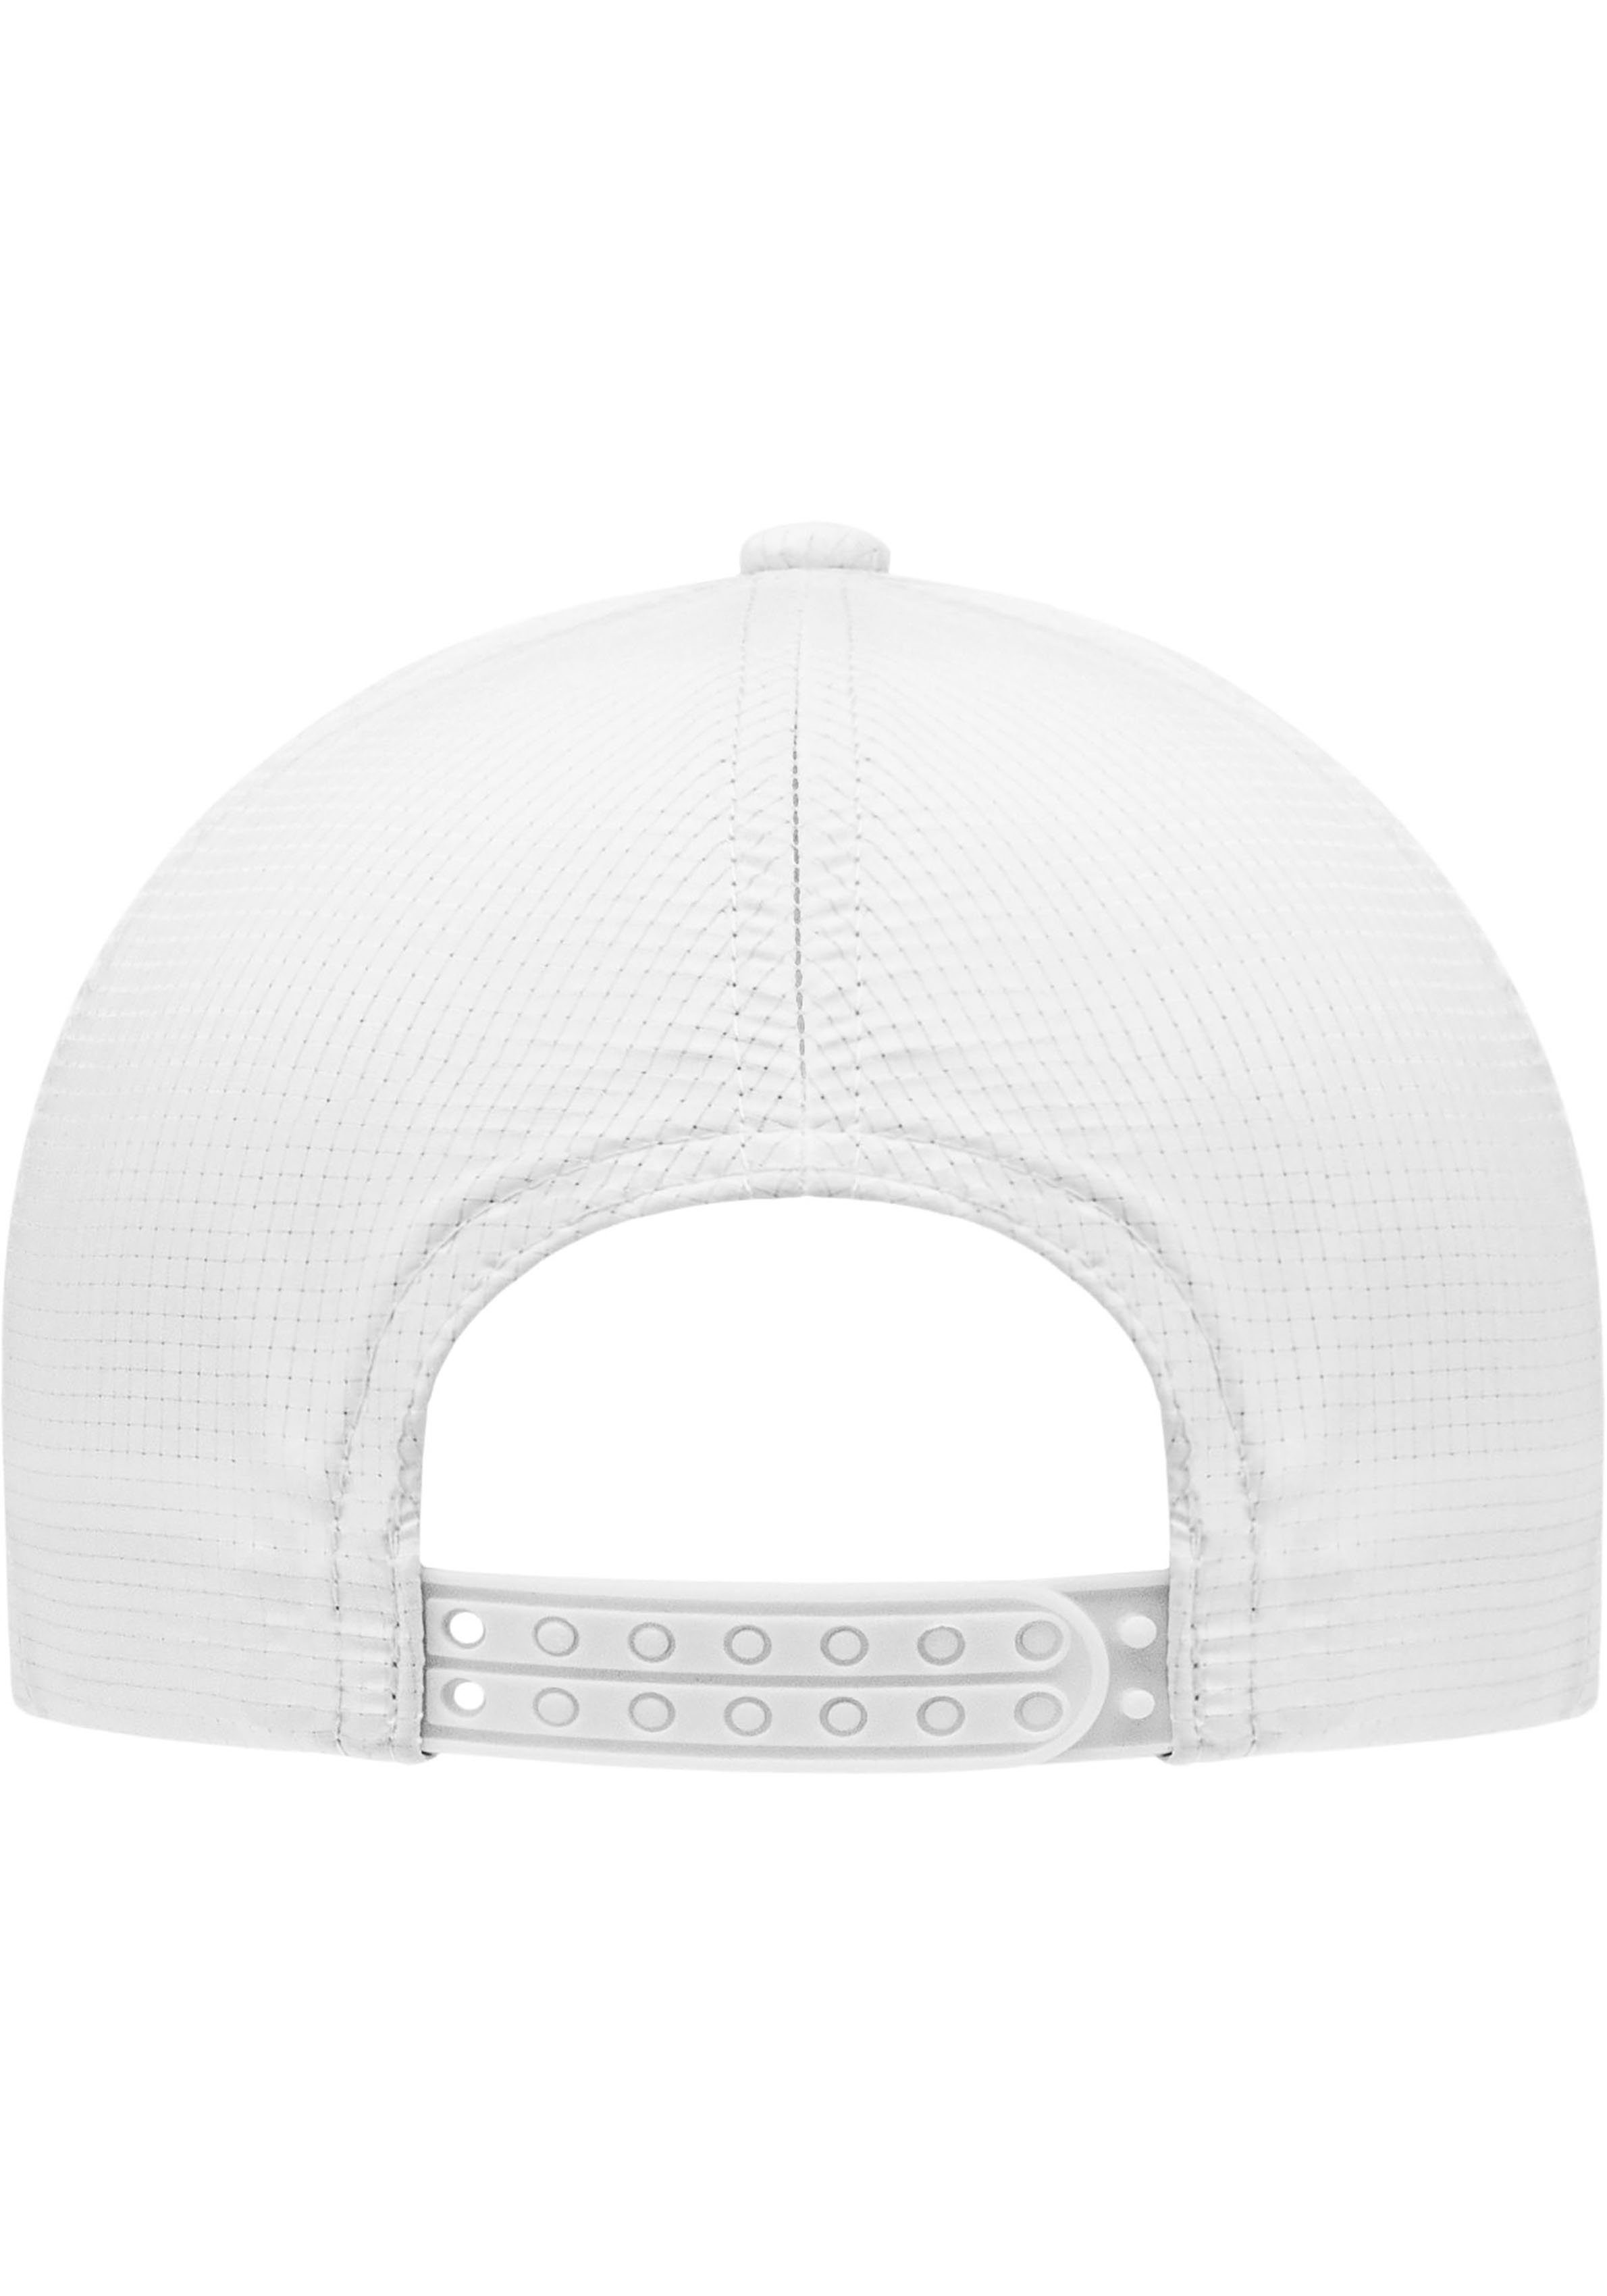 Langley Hat Cap weiß chillouts Baseball